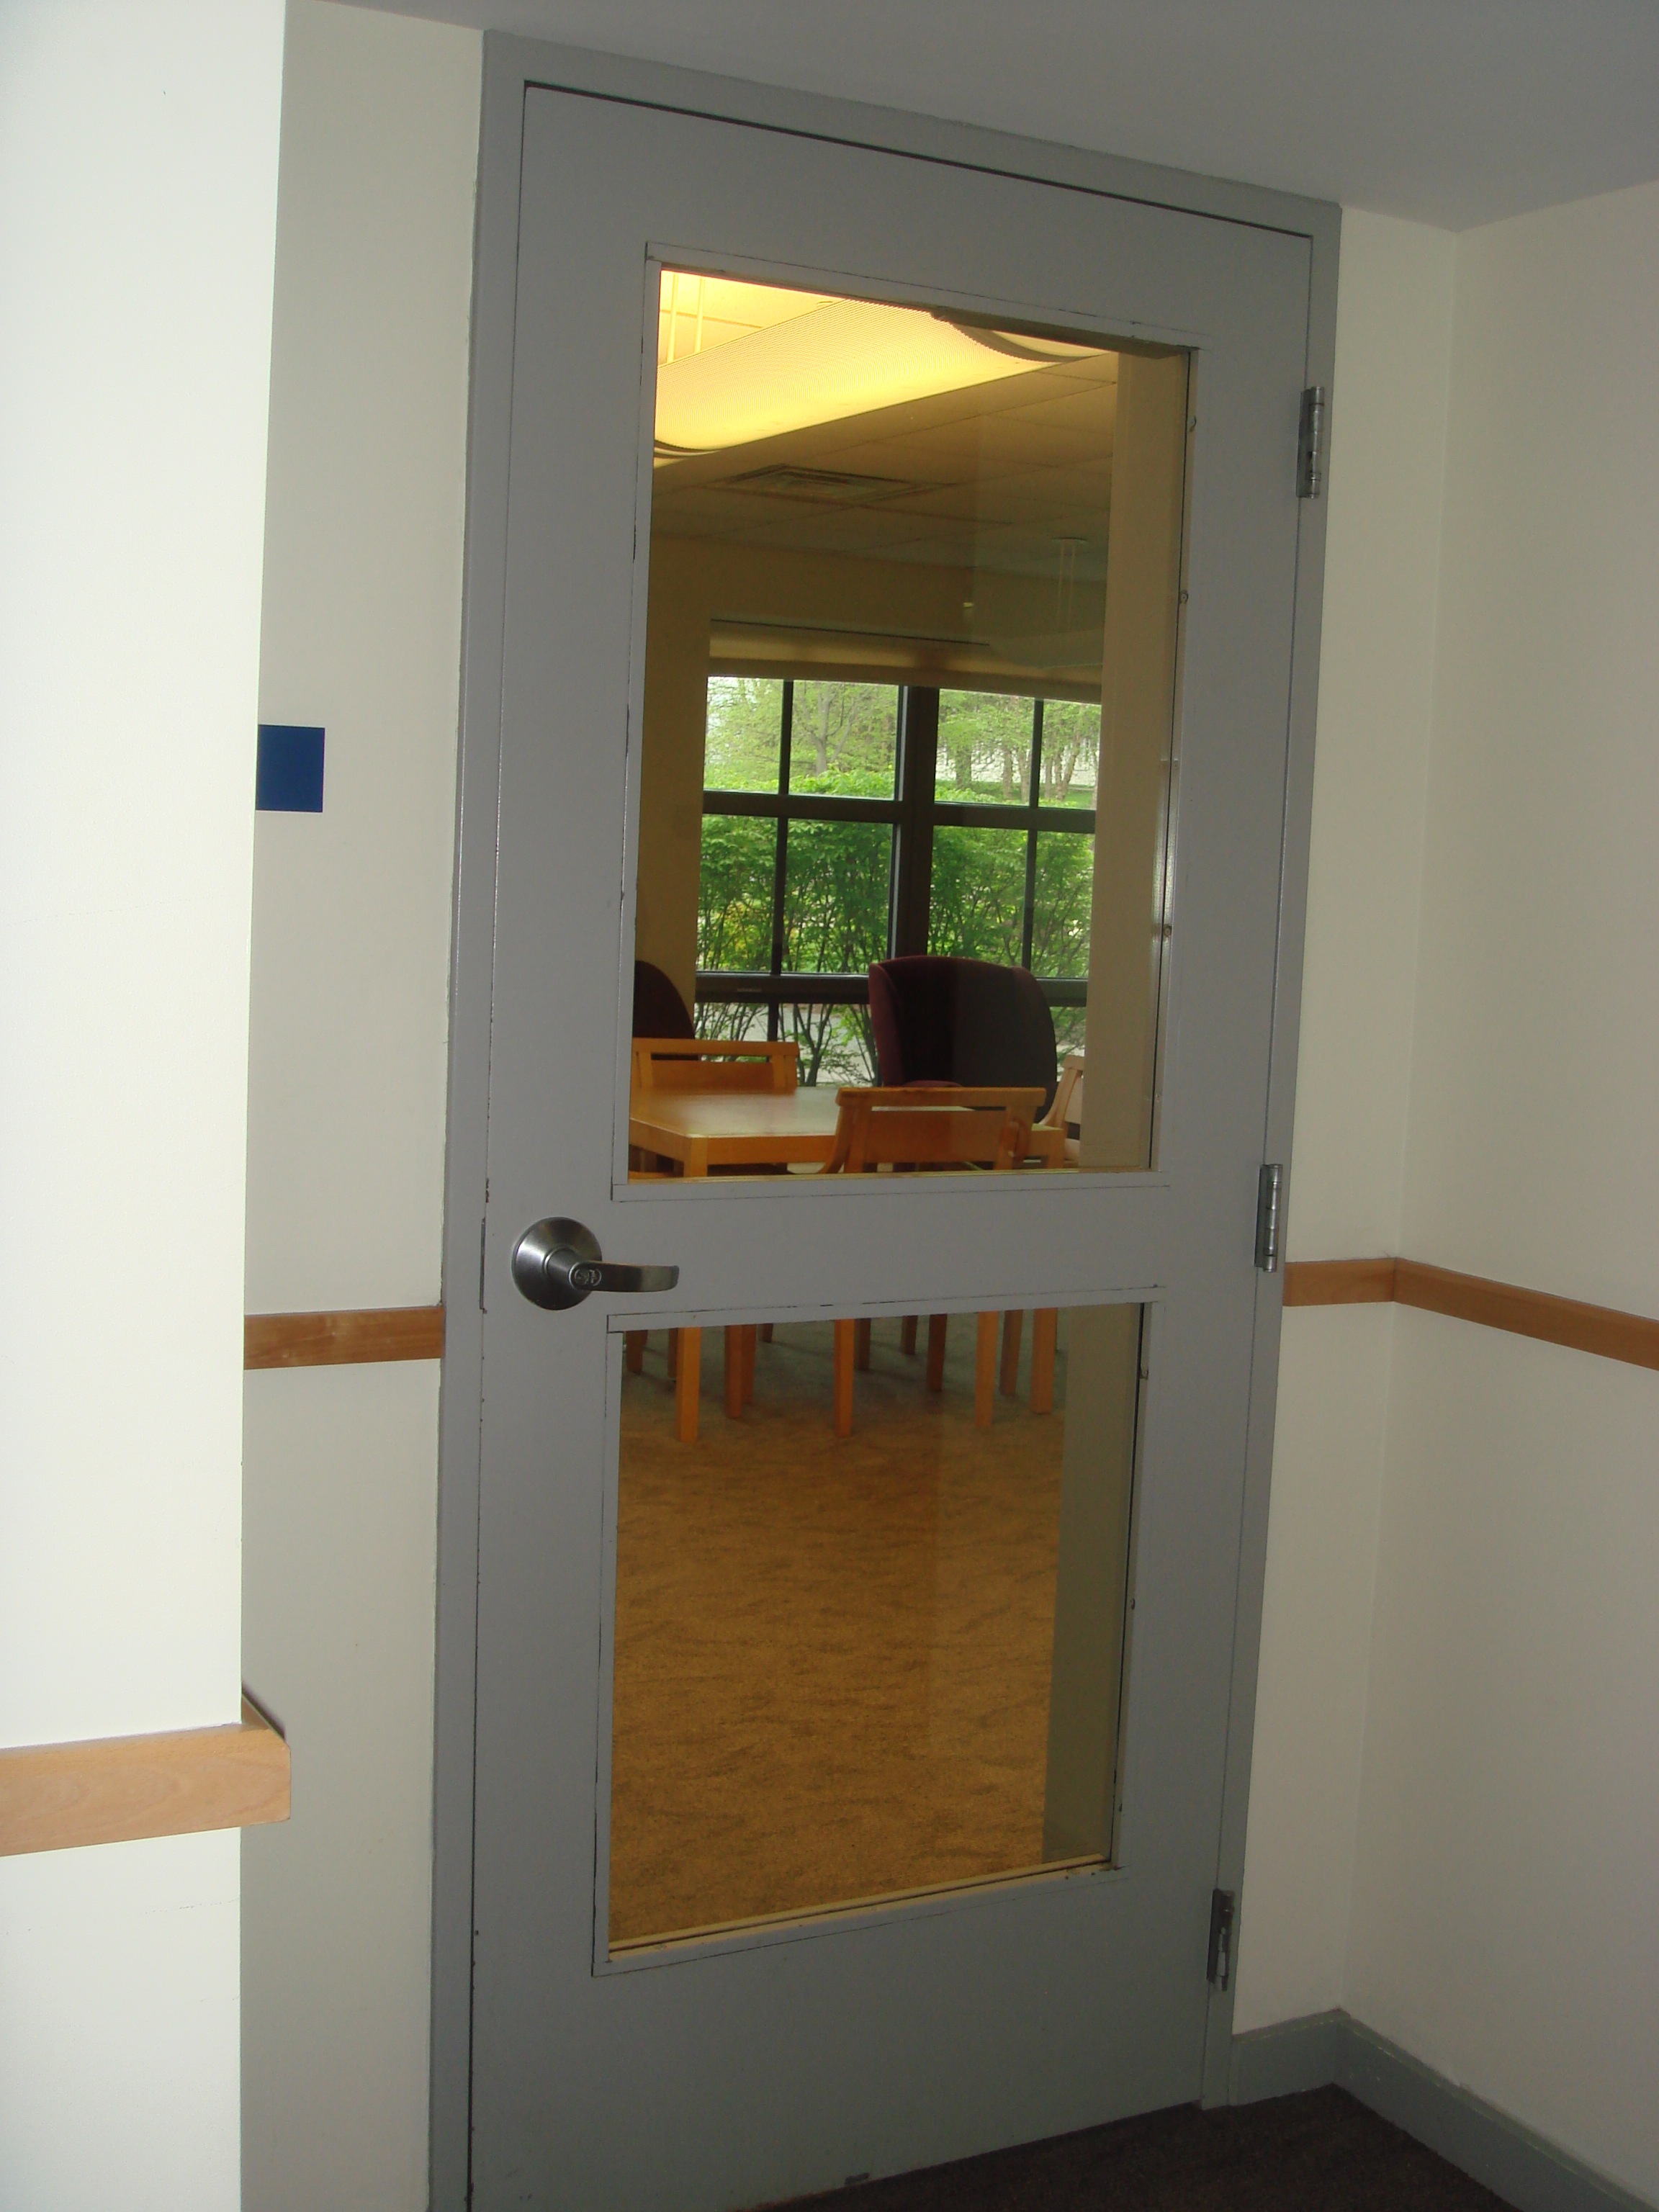 Wired Glass & CPSC Standards | Safe Glass For Schools